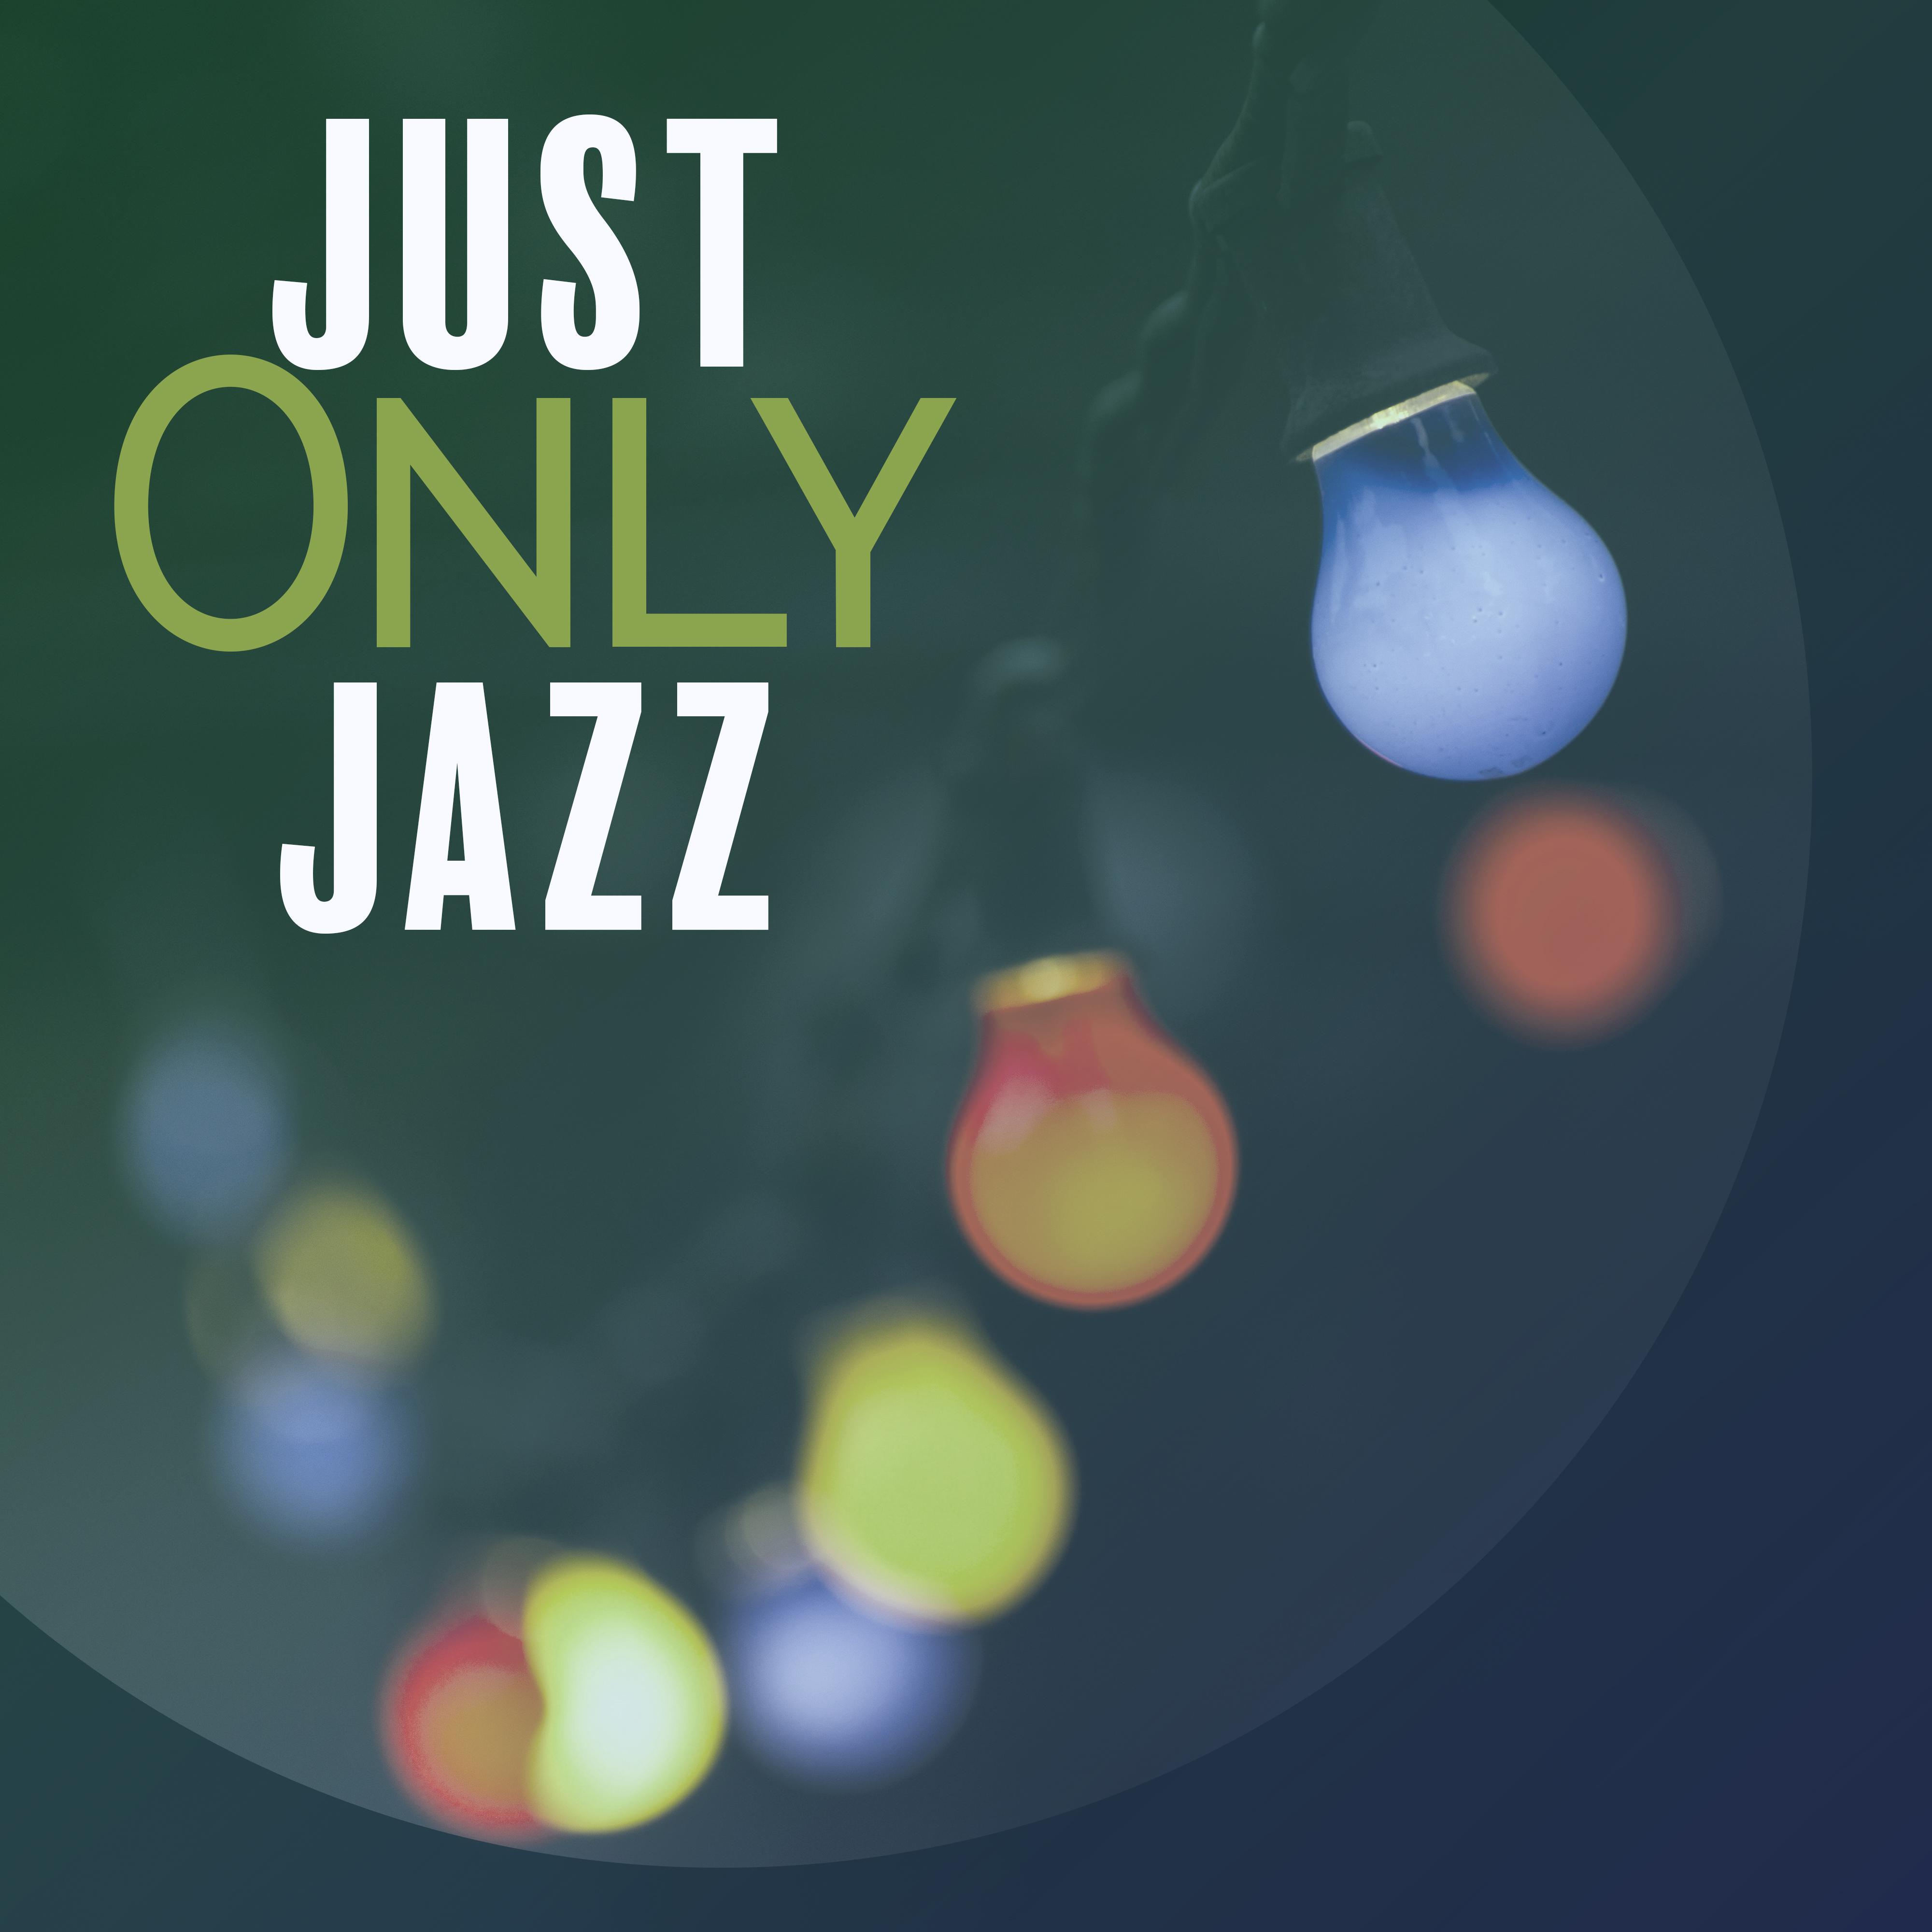 Just Only Jazz  Soothing Jazz Instrumental, Pure Piano Songs, Jazz Lounge